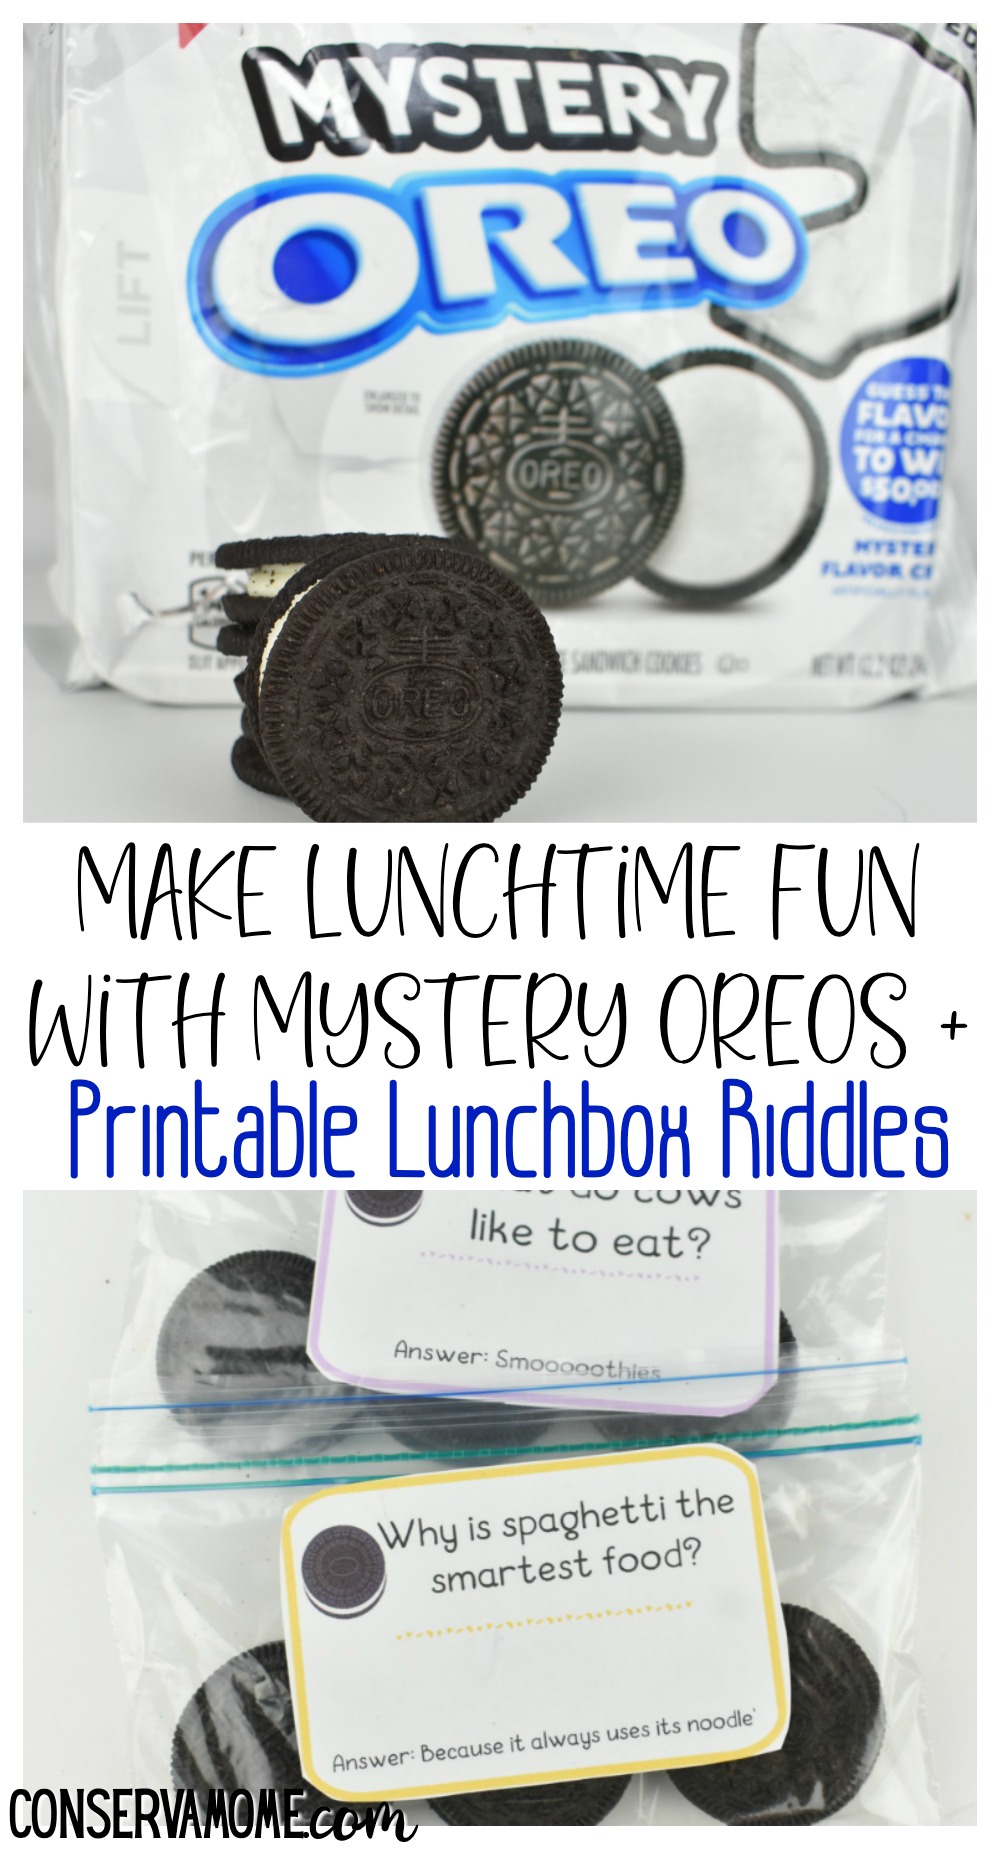 lunchbox riddle and mystery oreos